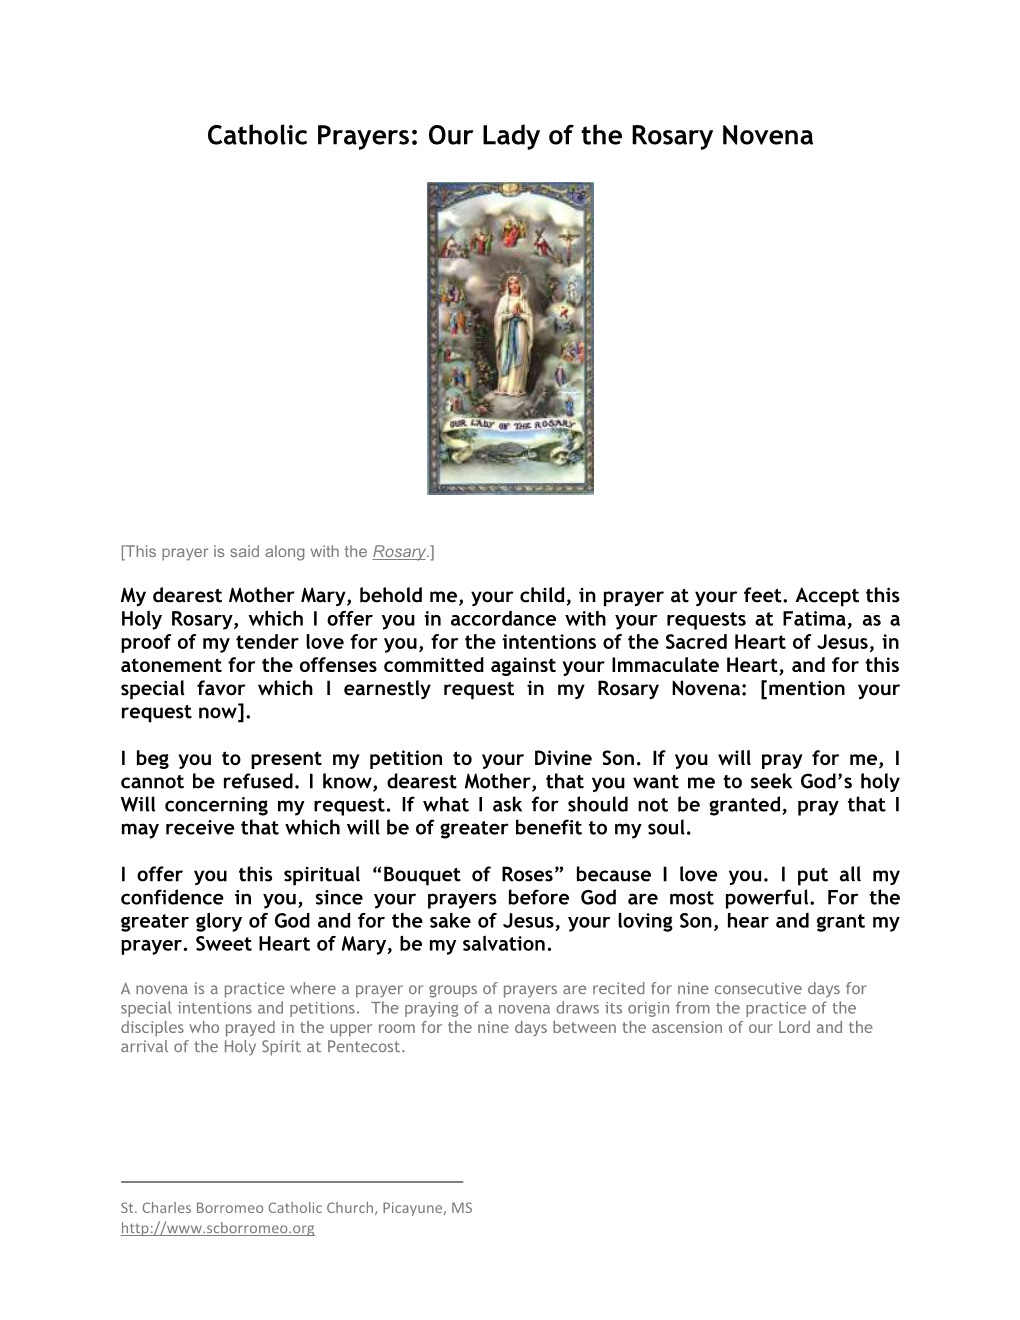 Our Lady of the Rosary Novena